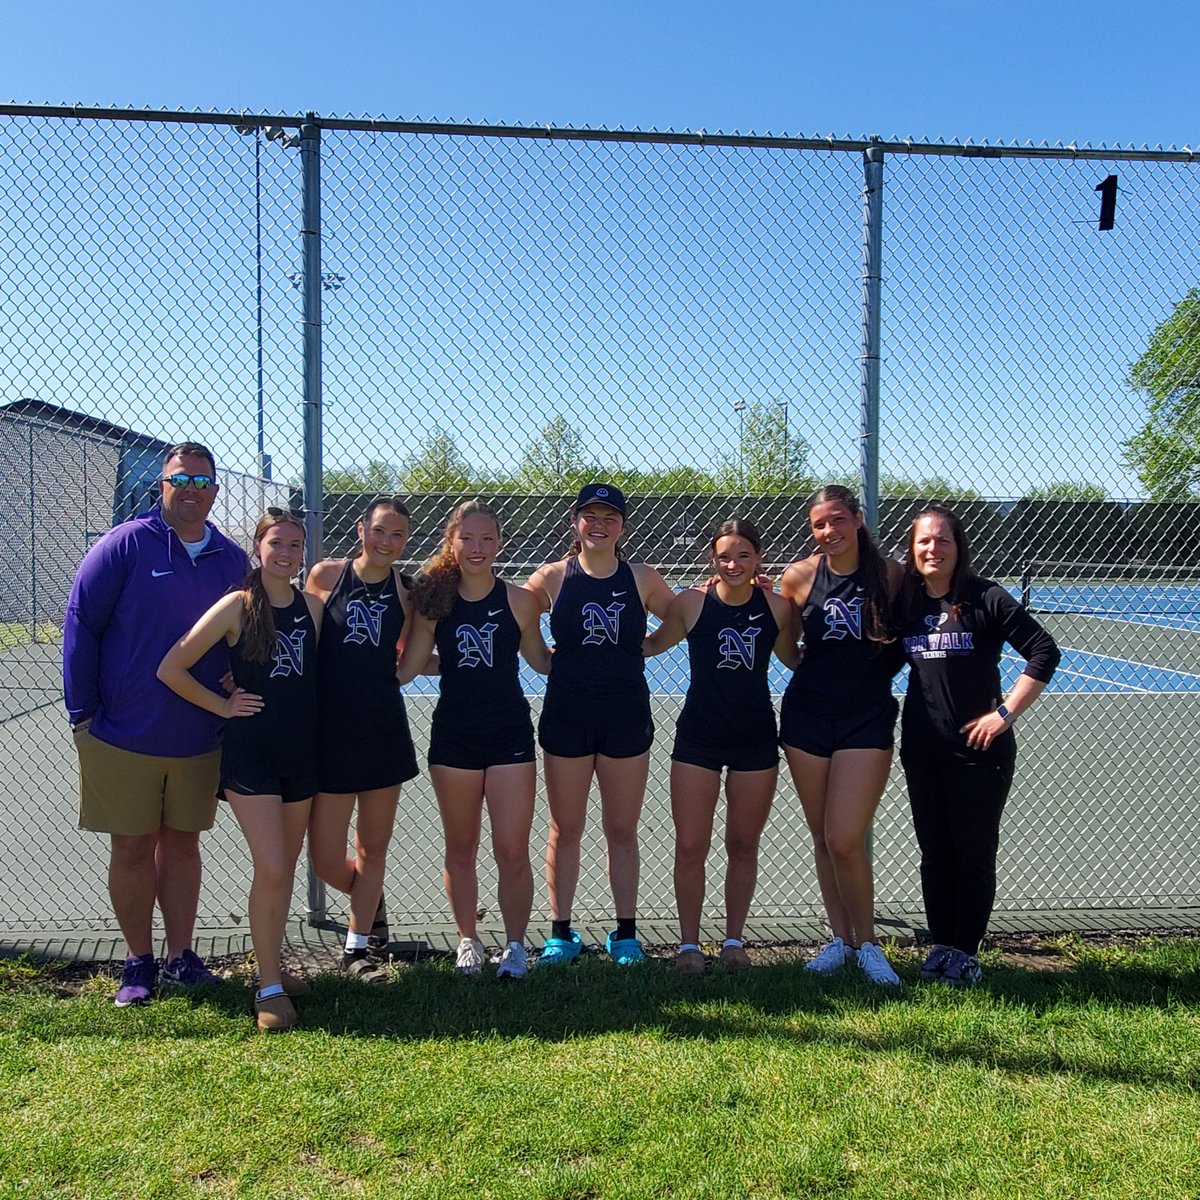 Norwalk with a 5-0 victory over SE Polk. The Warriors advance to the second round of team tennis next Tuesday vs. Ankeny Centennial. The match will be played at Waukee Northwest. #tourneytime #BeAWarrior